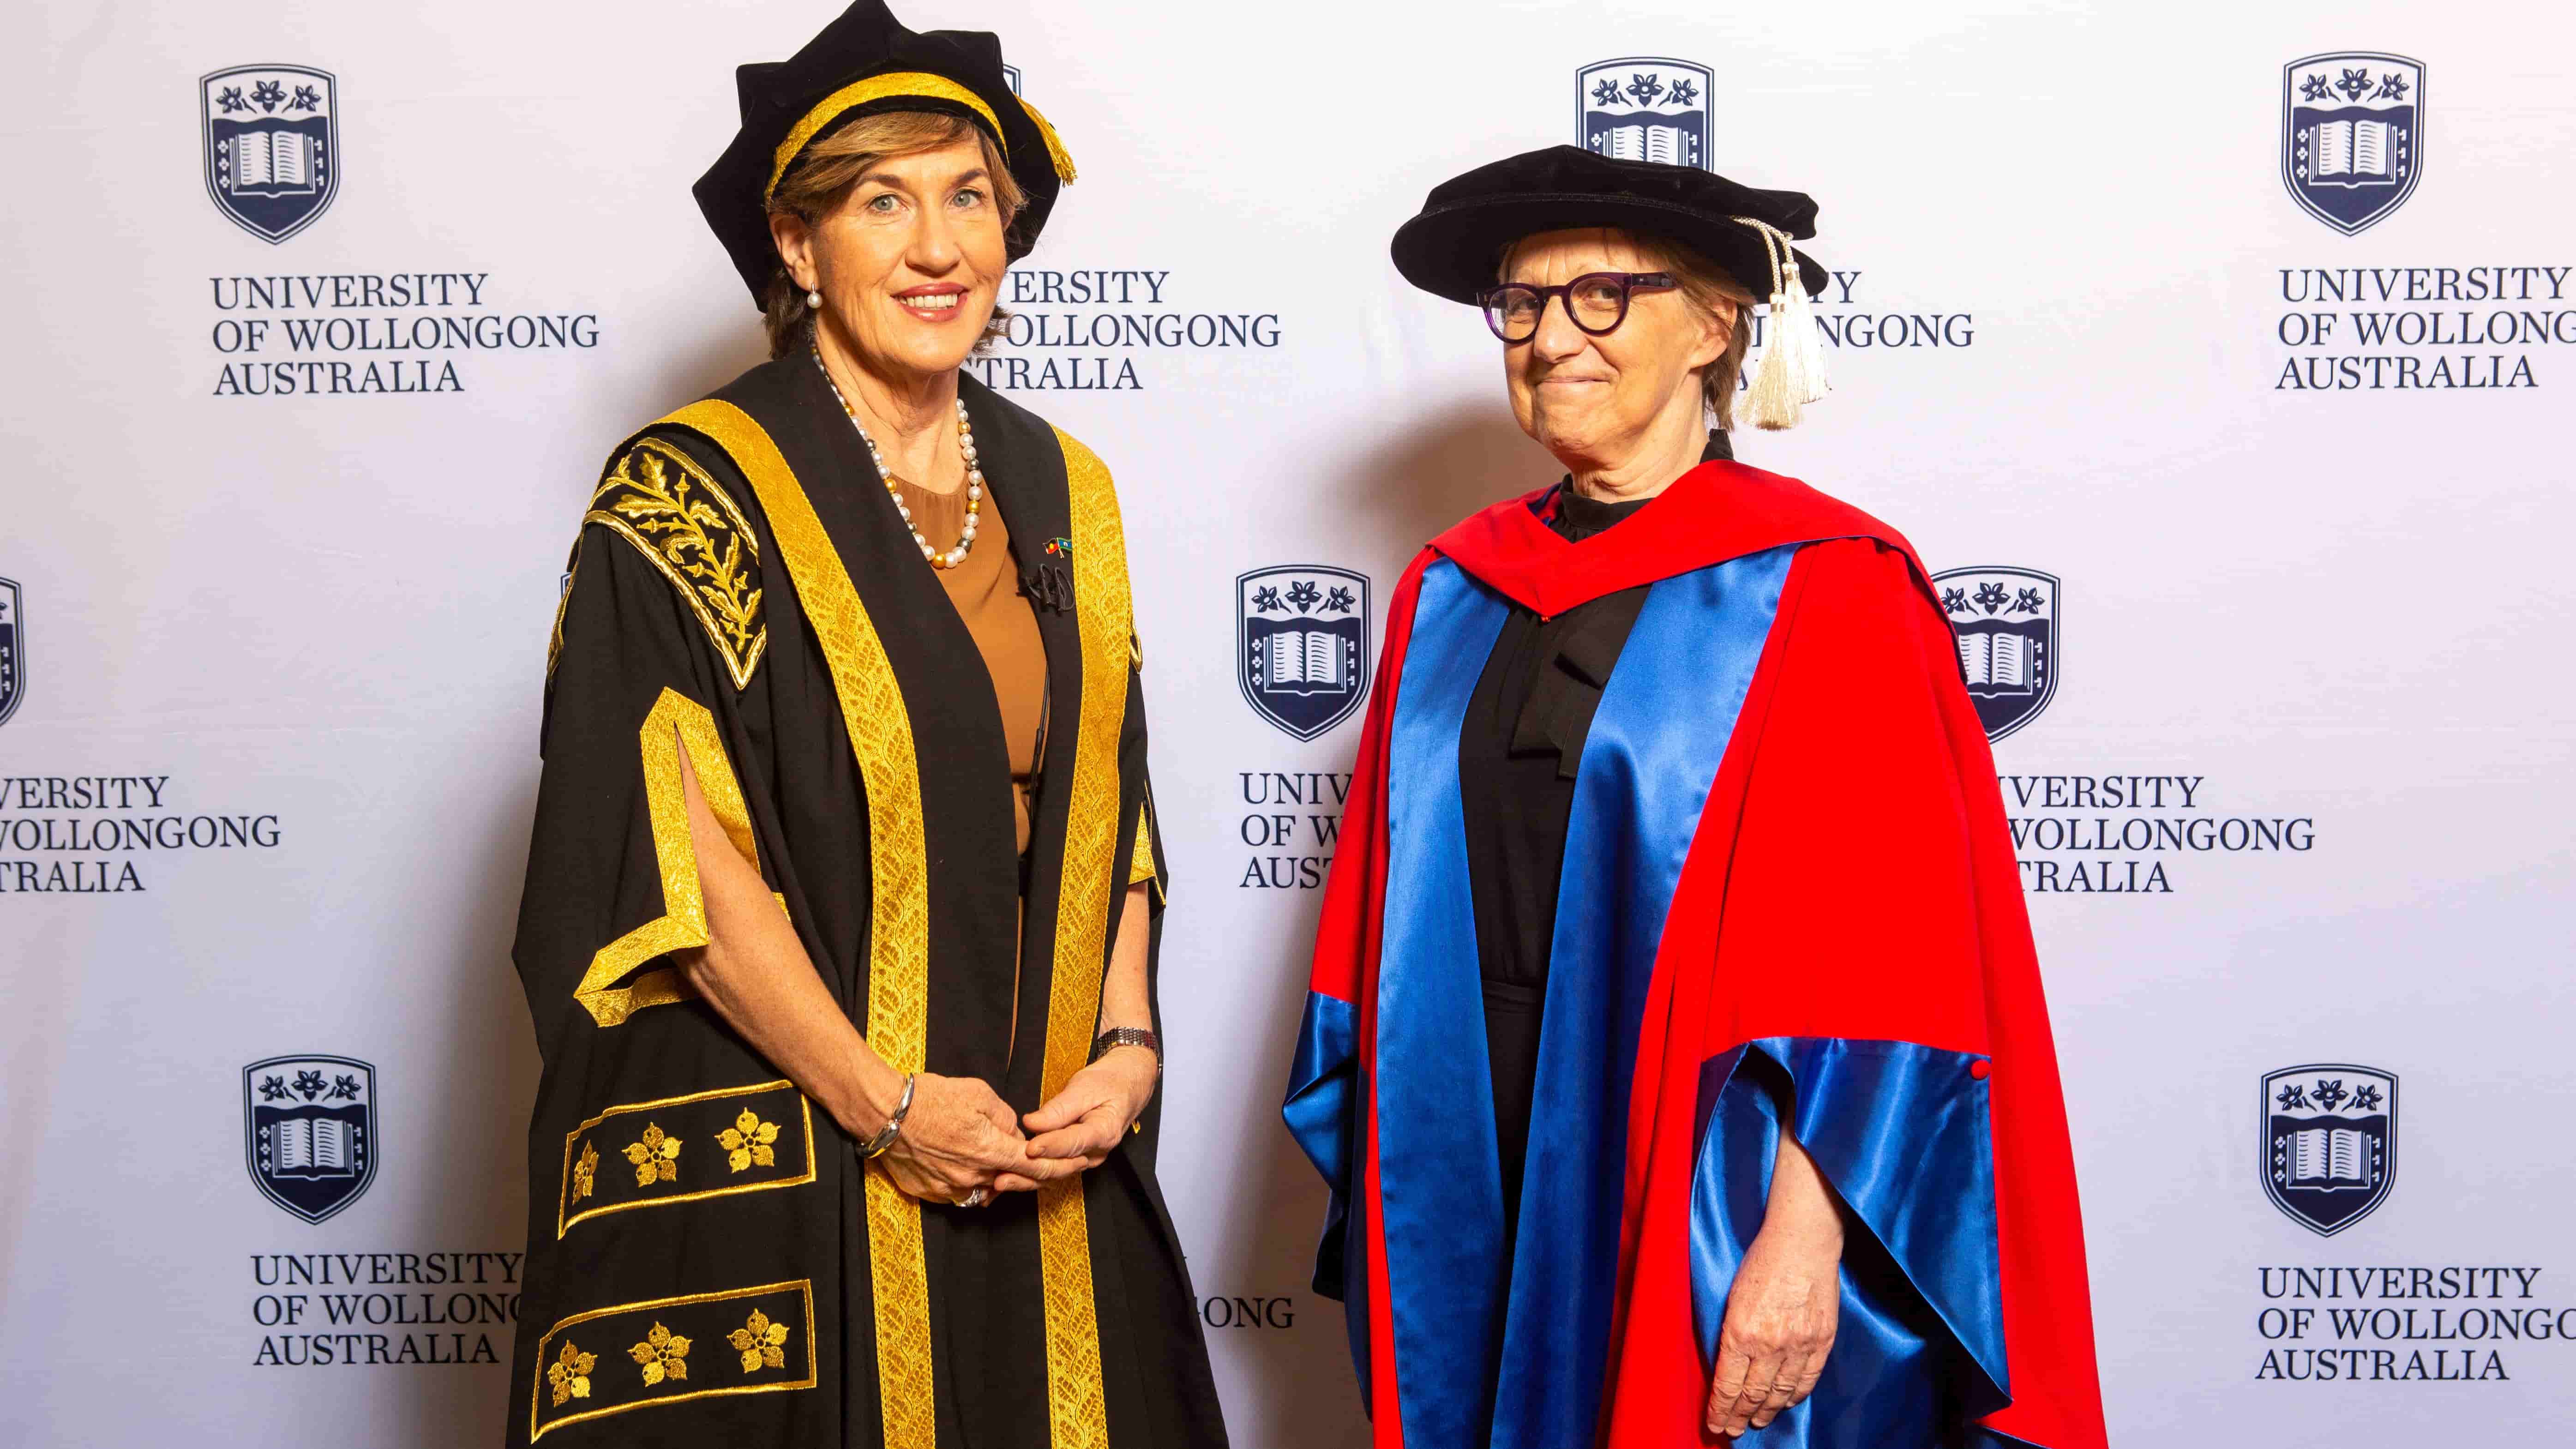 UOW Chancellor Christine McLoughlin and Professor Judy Raper wear graduation gowns and stand in front of a UOW wall. Photo: Andy Zakeli